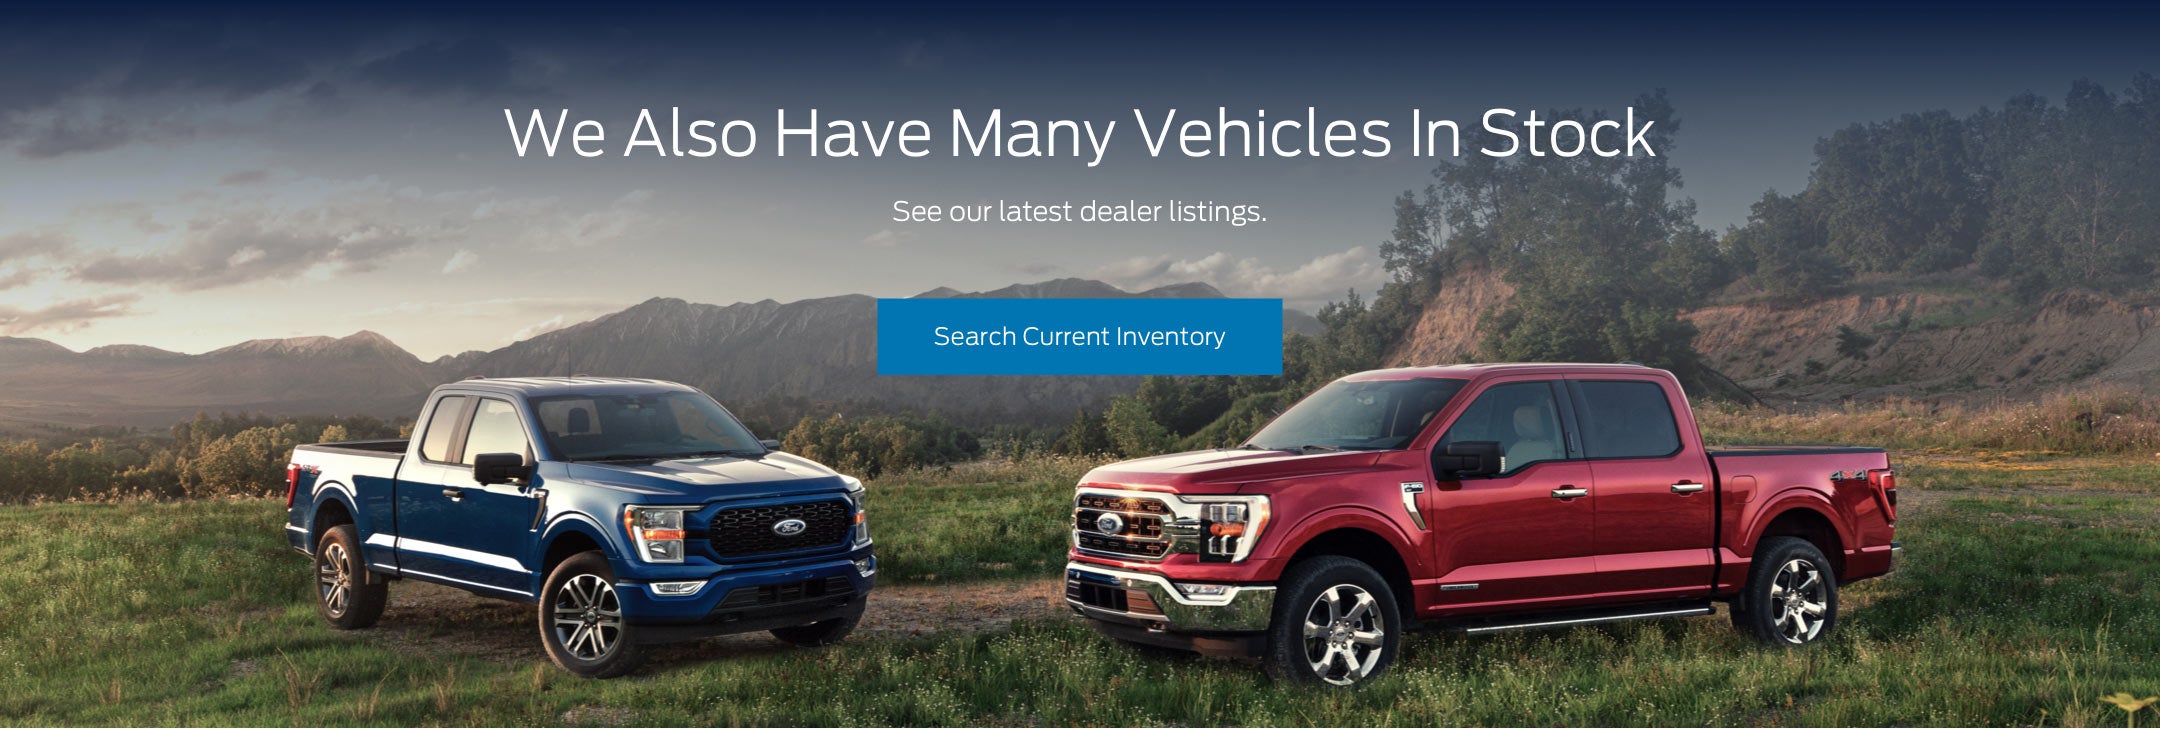 Ford vehicles in stock | James Ford Inc. in Half Moon Bay CA